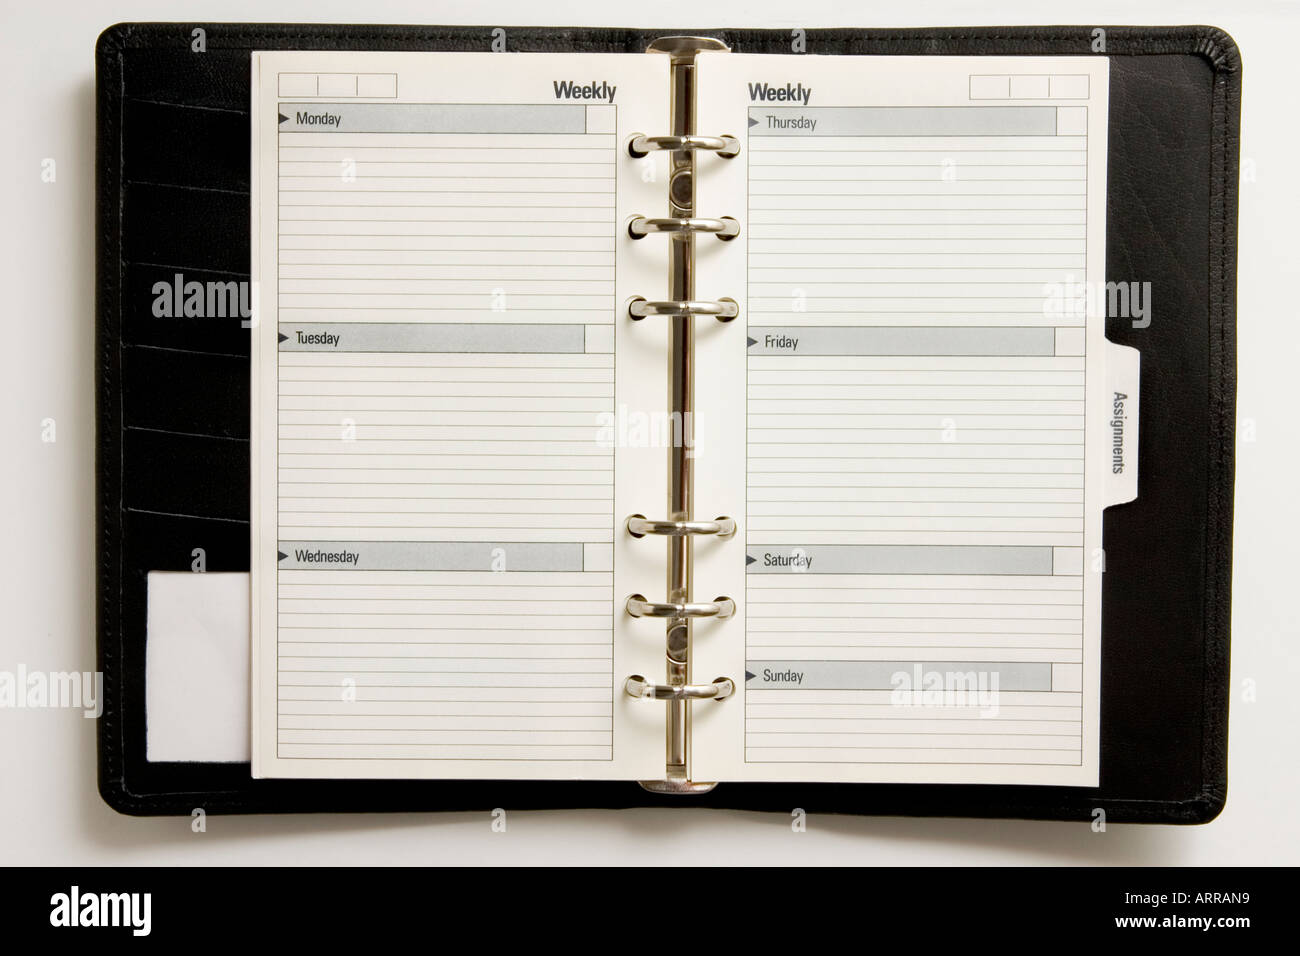 Blank business agenda ready for writing plan Stock Photo